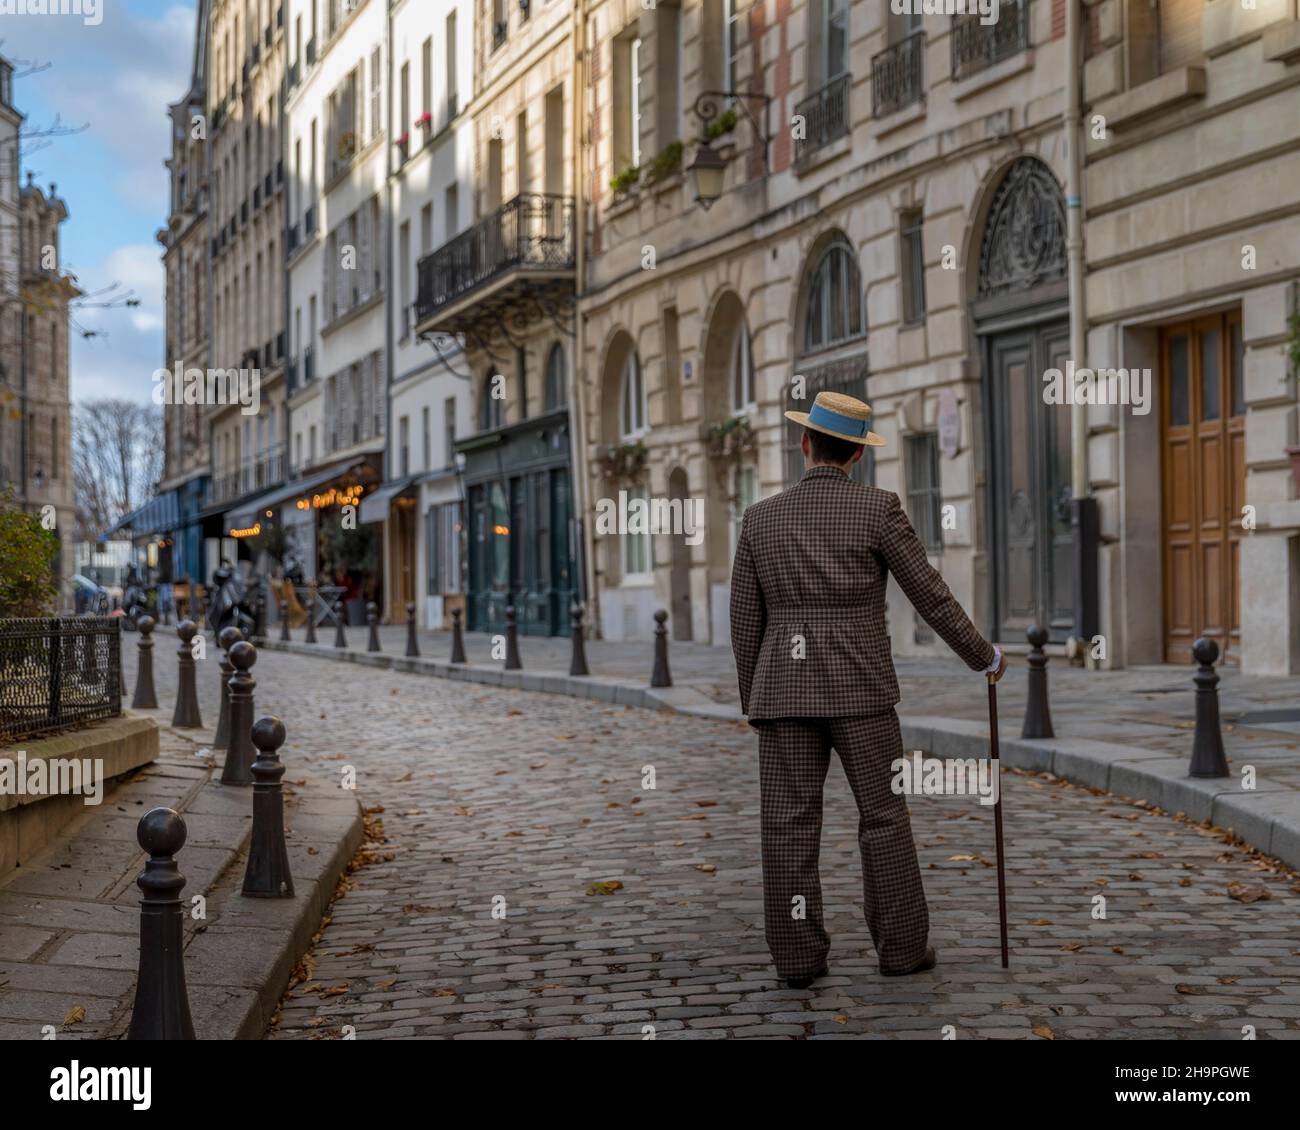 Paris, France - November 28, 2021: A man with a hat, dressed as at the beginning of the century , walks in the streets of Paris Stock Photo